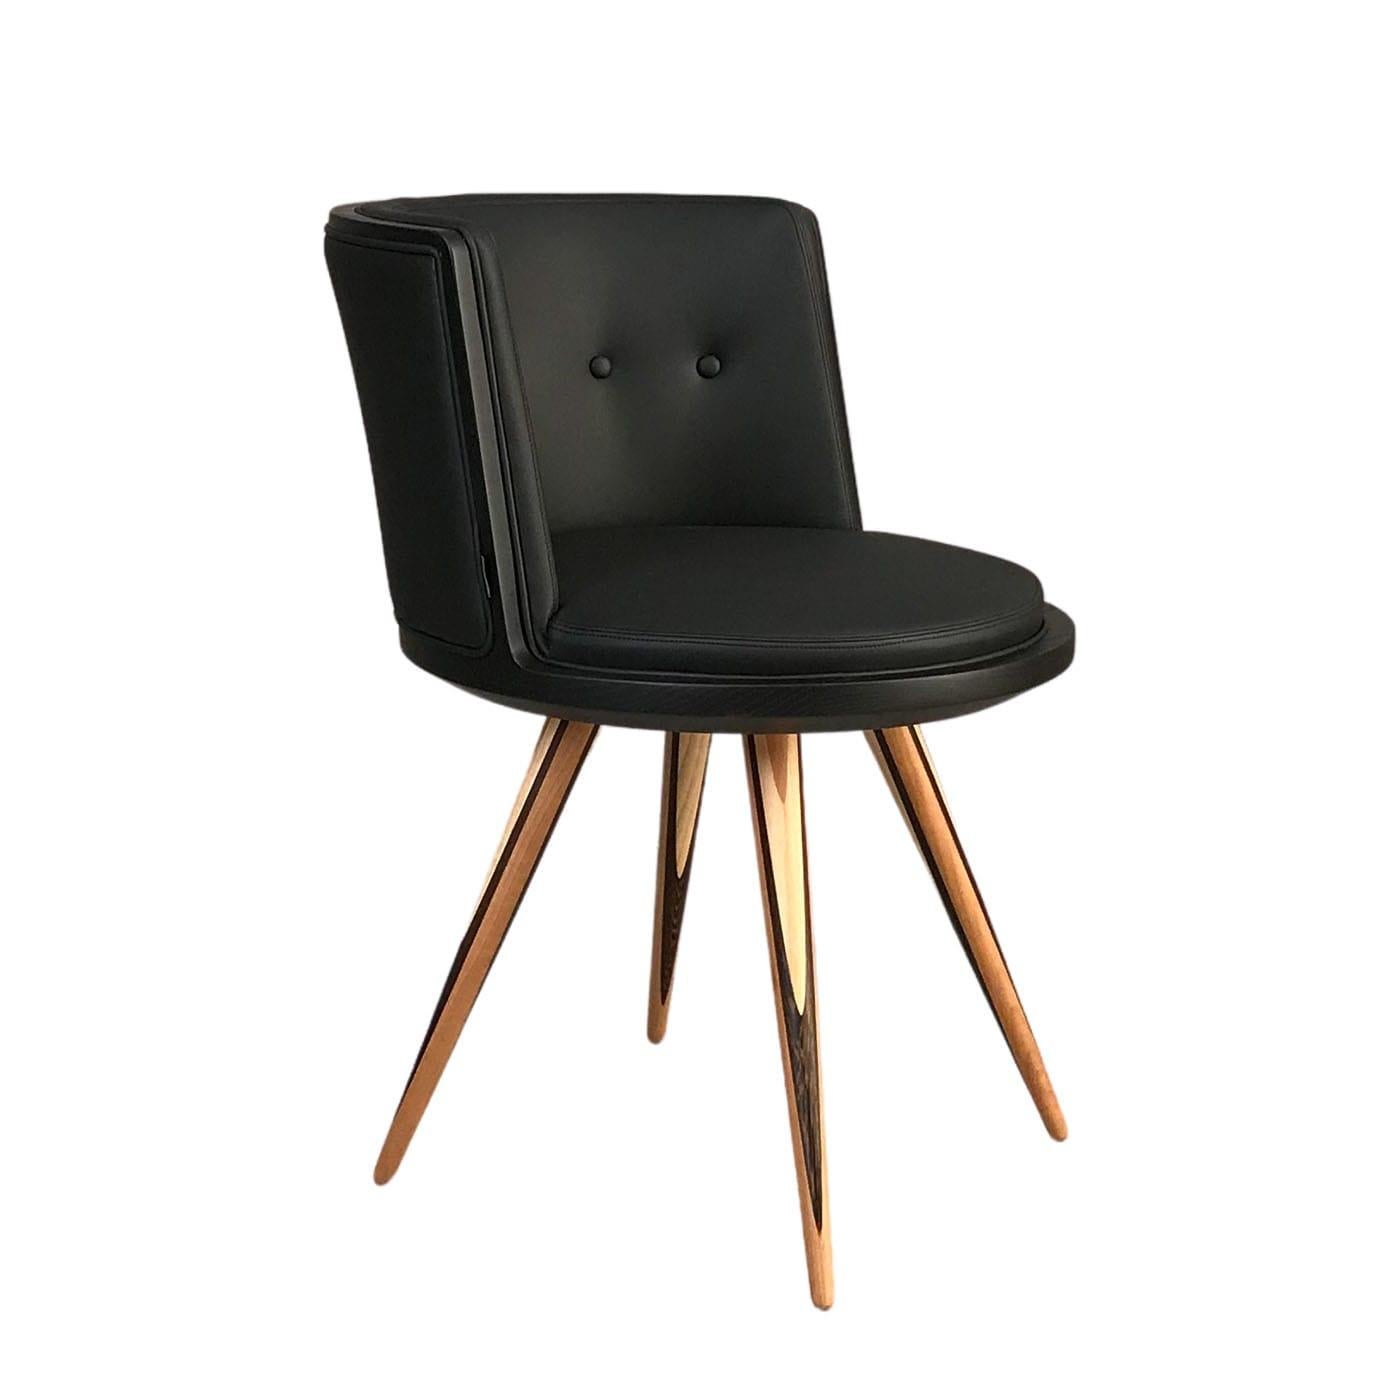 An elegant accent to a contemporary study or living room, this stupendous chair exudes comfort and sophistication. Handmade of ash wood lacquered in a black shade, the round seat is softly padded and upholstered with black leather, matching the